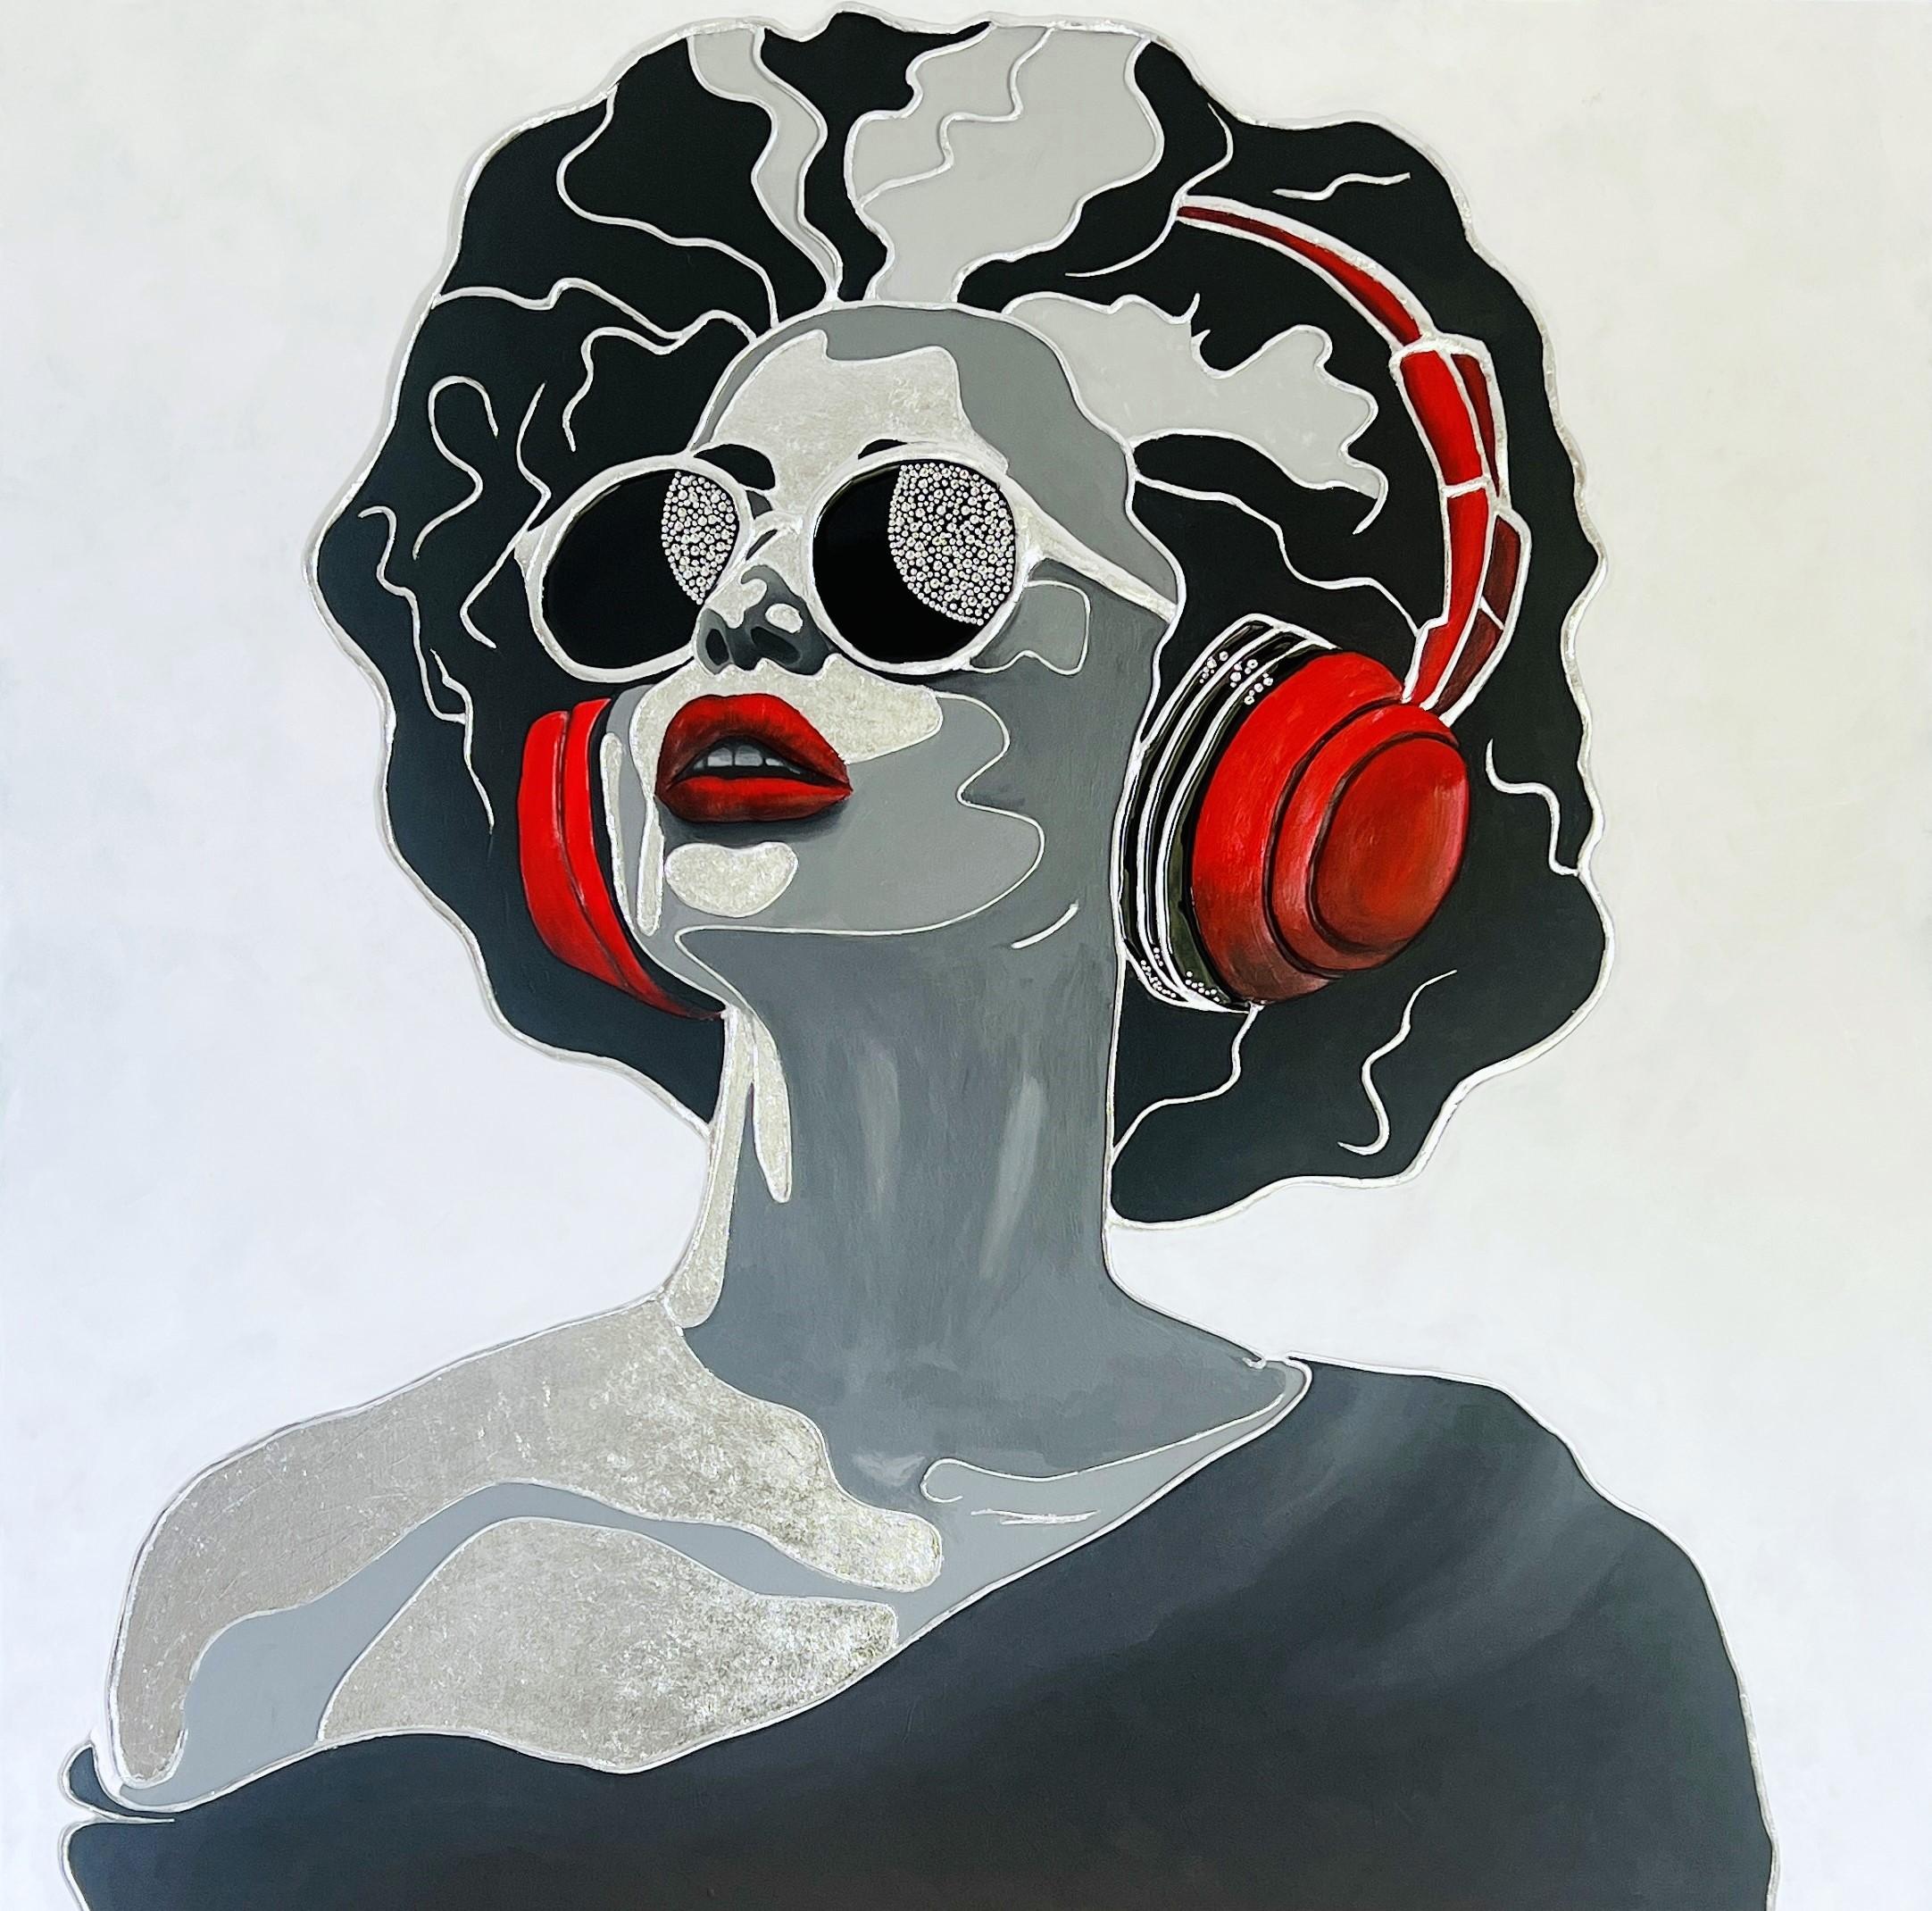 Lana Ritter Portrait Painting - Red, White, Black and Music. Sculptural 3D artwork